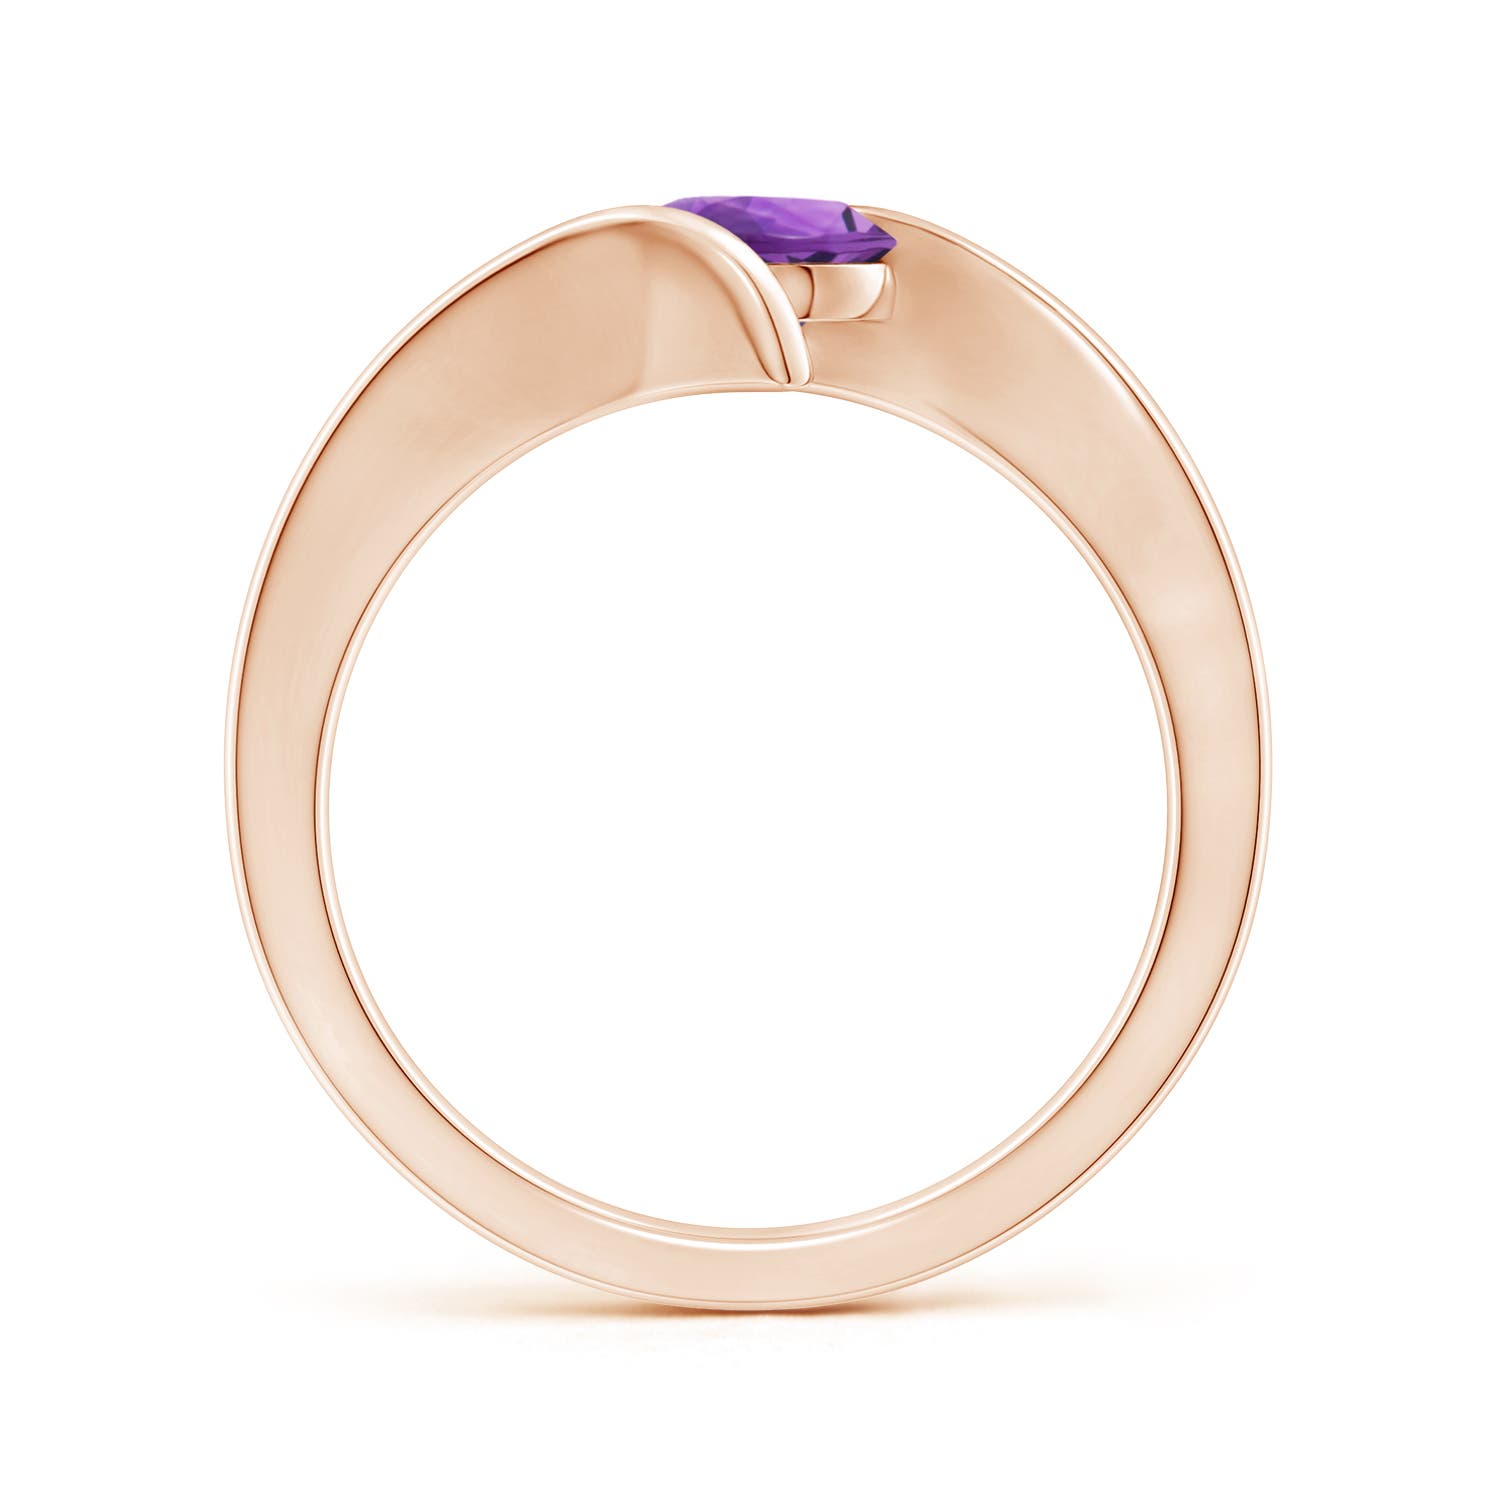 AAA - Amethyst / 0.8 CT / 14 KT Rose Gold